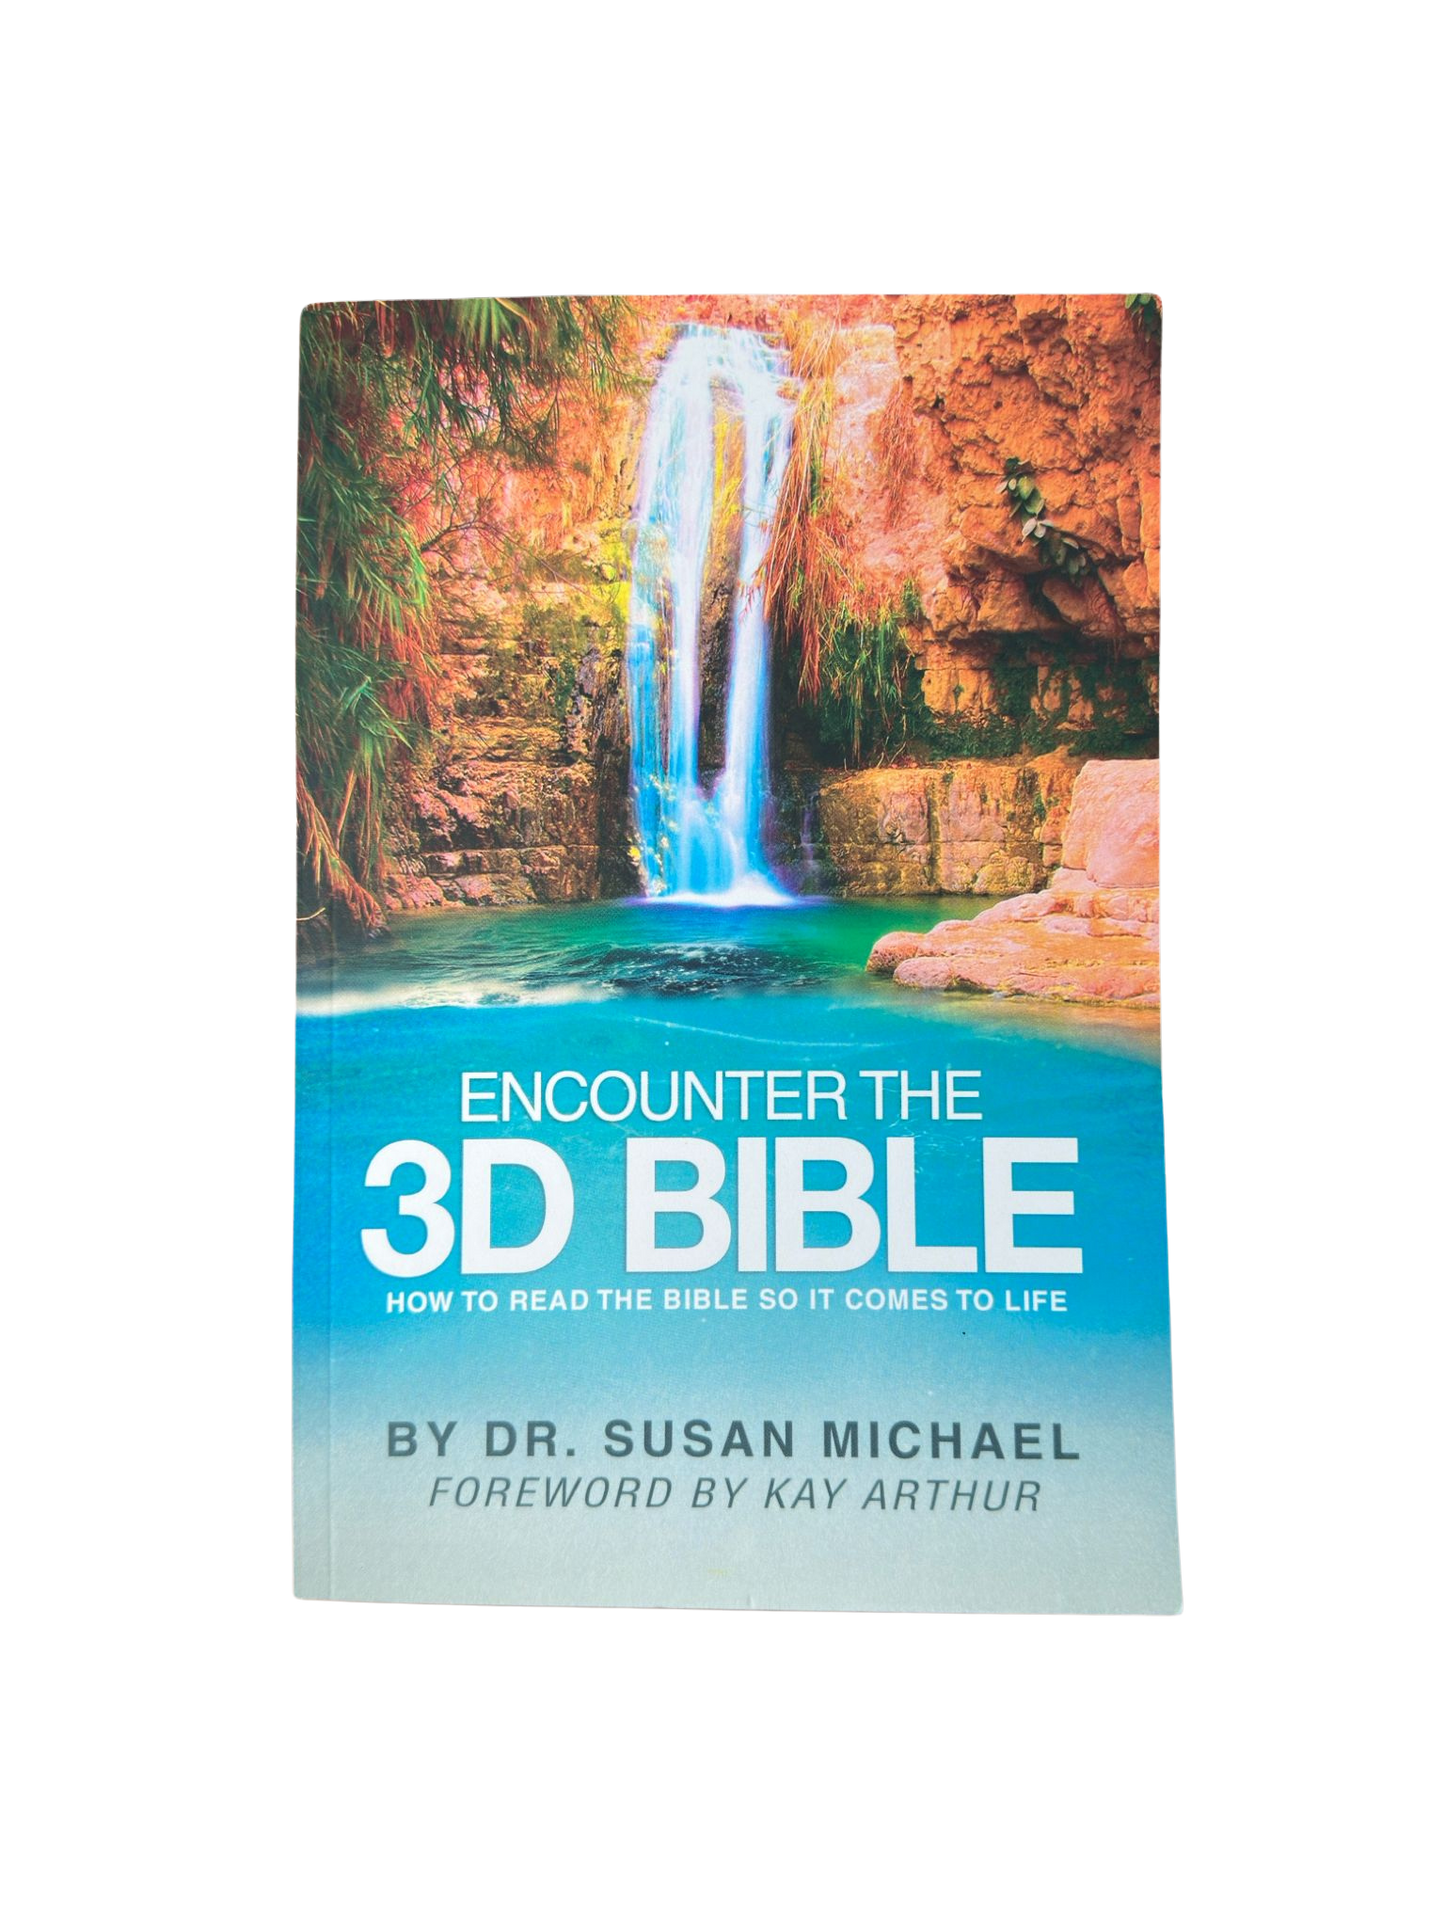 Encounter the 3D Bible: How to read the Bible so it comes to life by Dr. Susan Michael